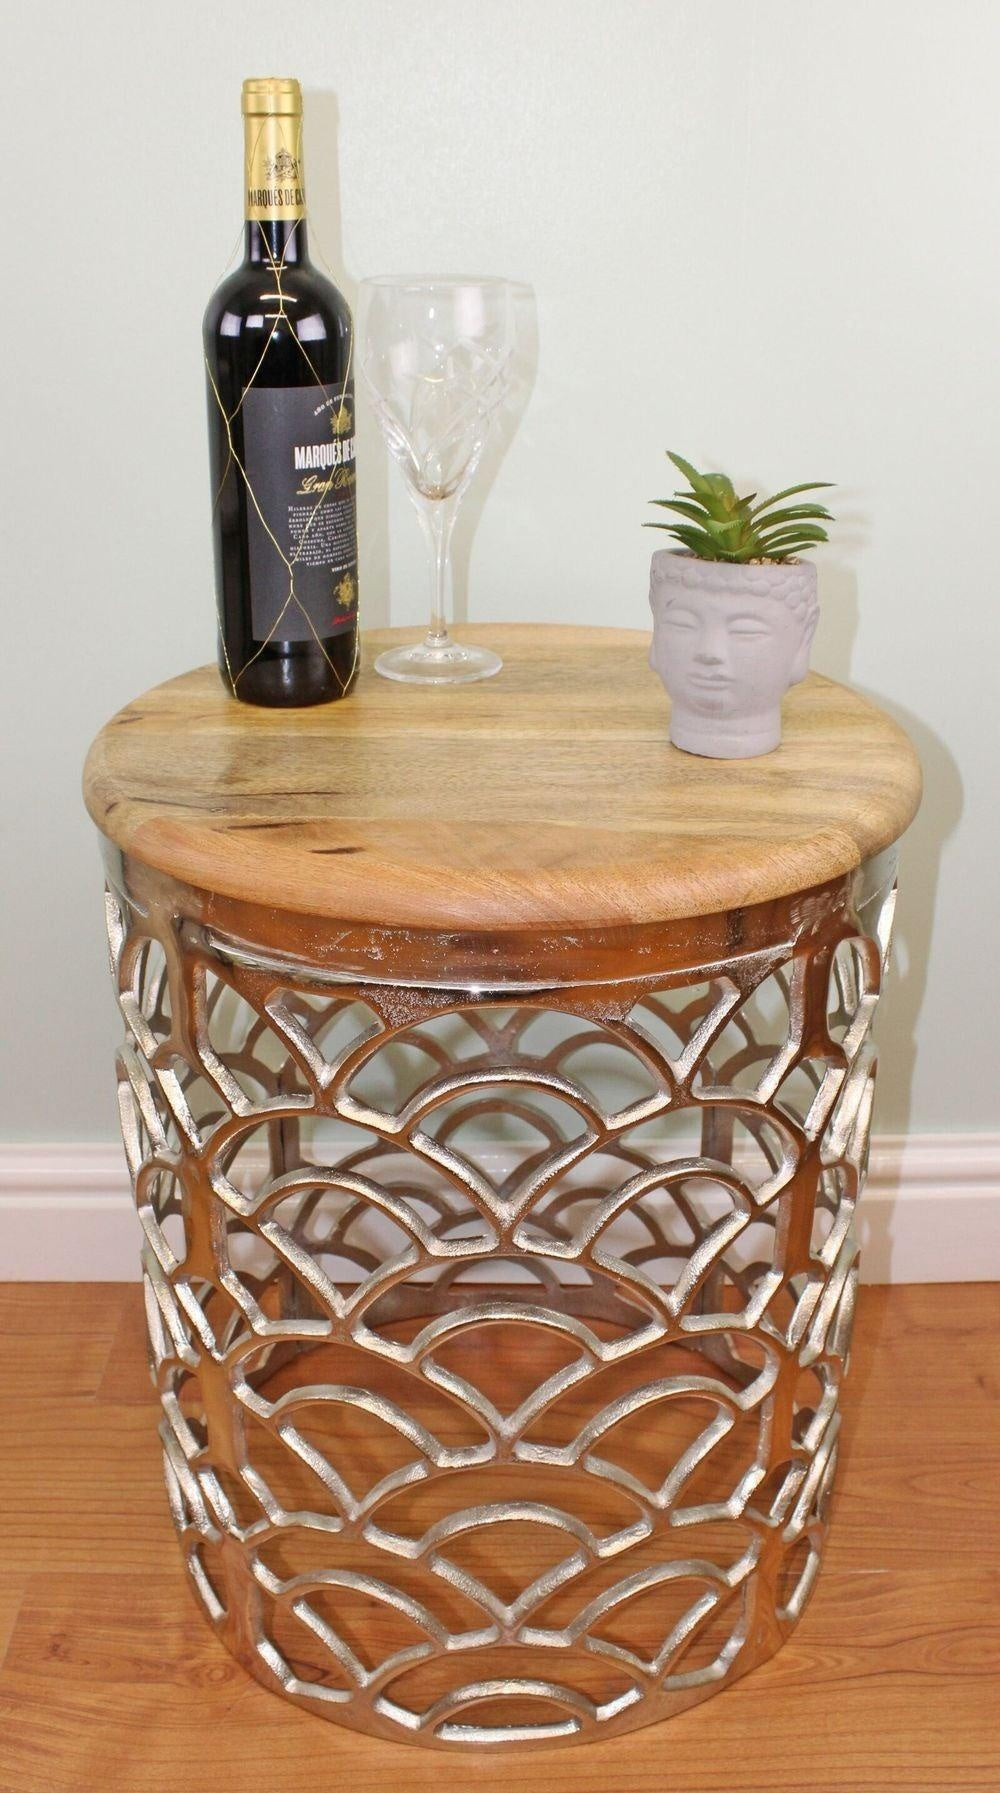 Decorative Silver Metal Side Table With A Wooden Top 50 x 41cm